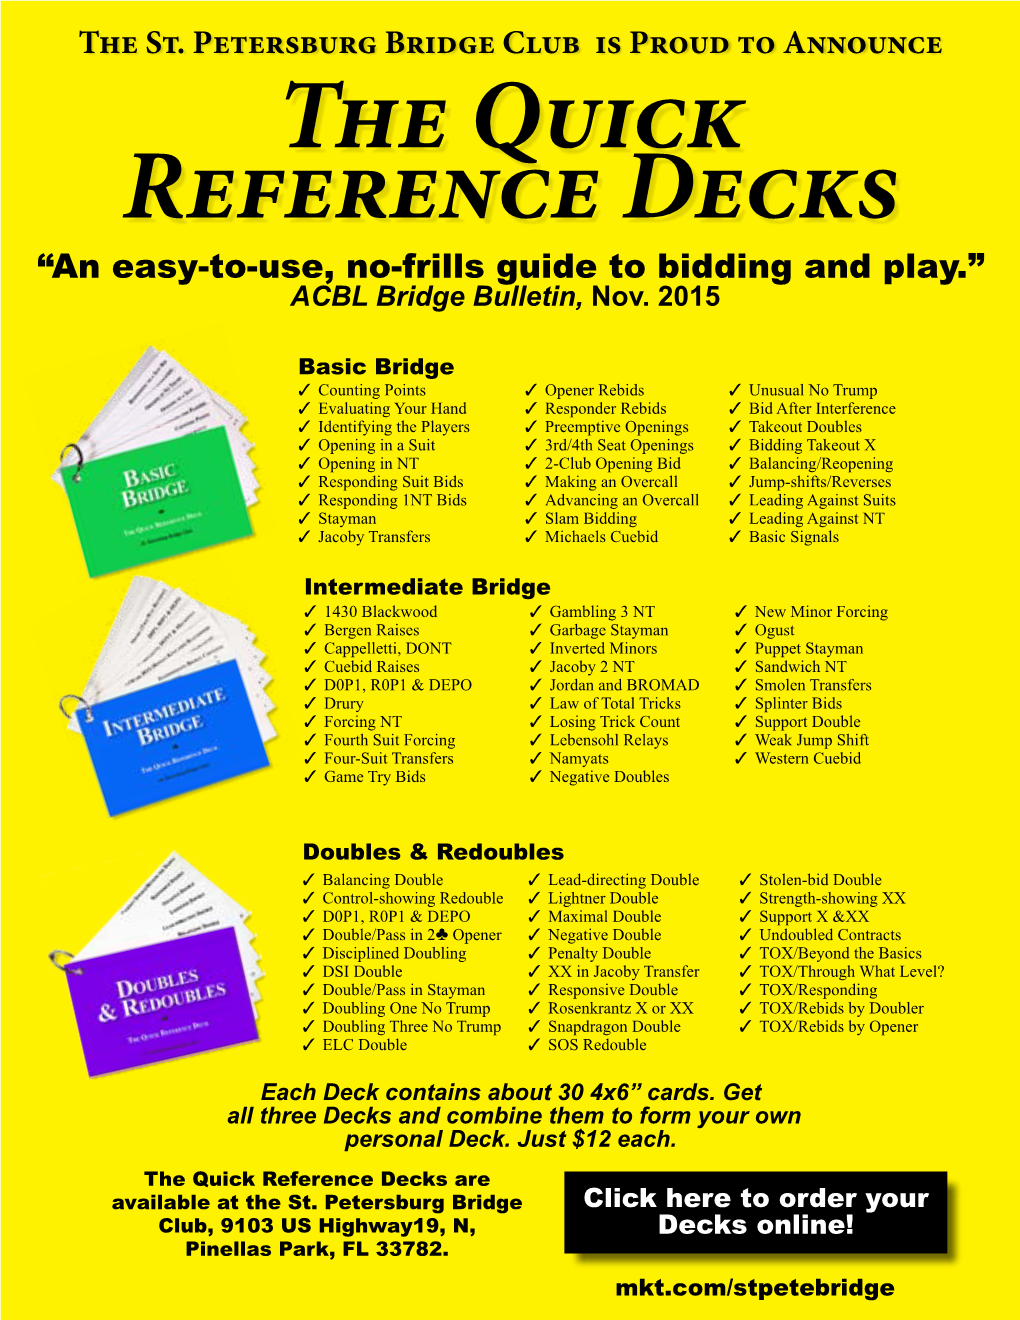 The Quick Reference Decks Are Available at the St